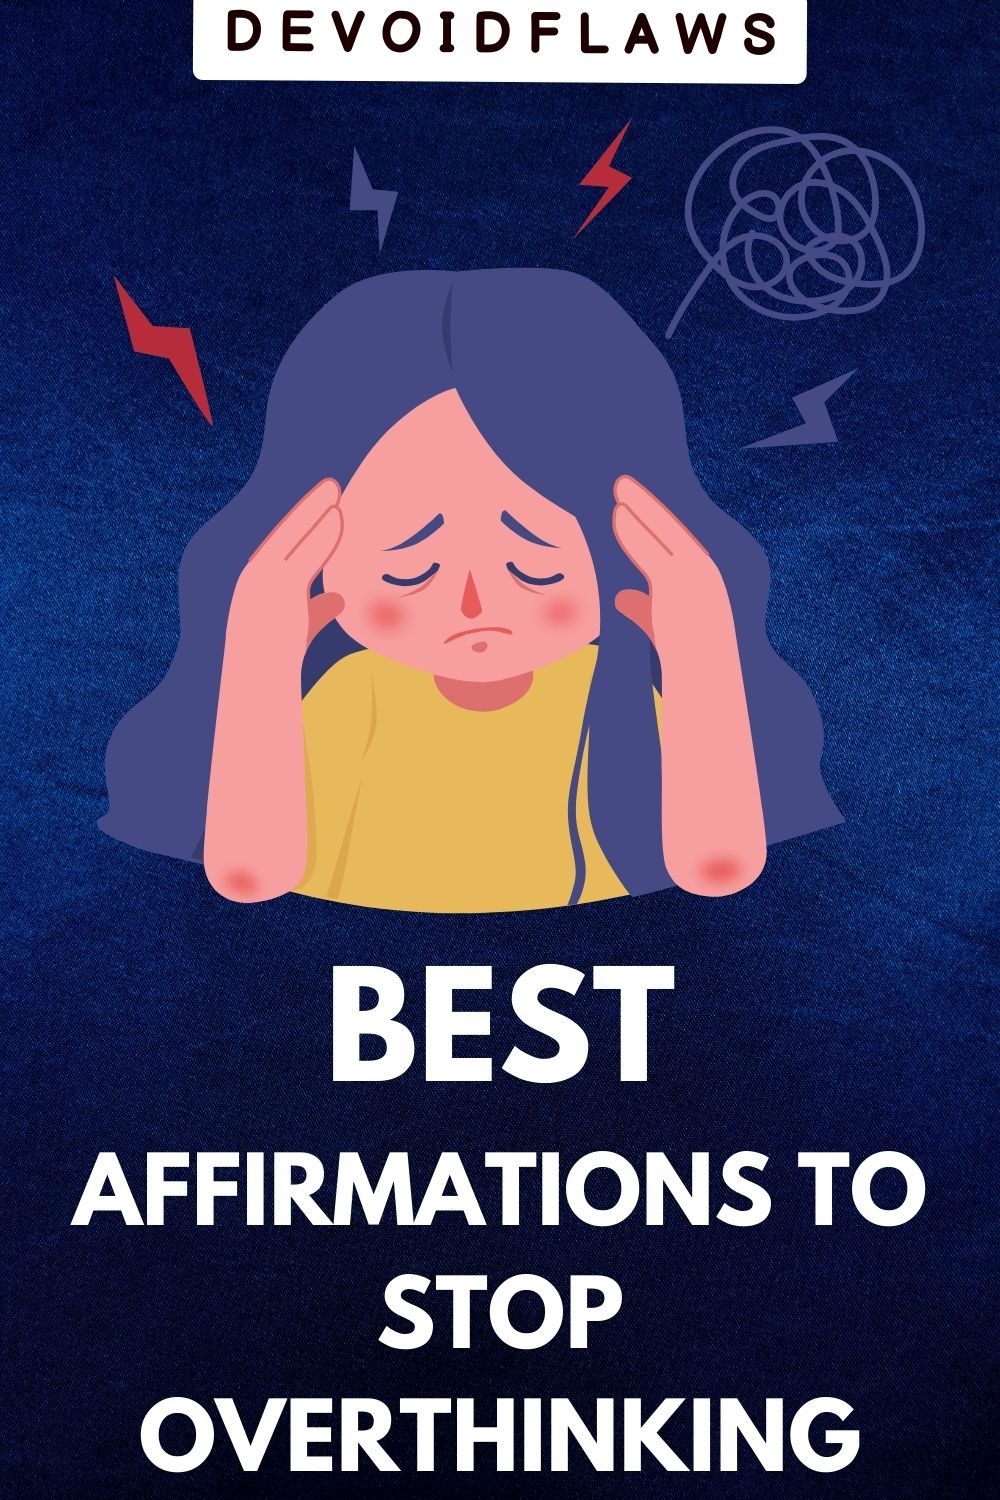 image with text - best affirmations to stop overthinking